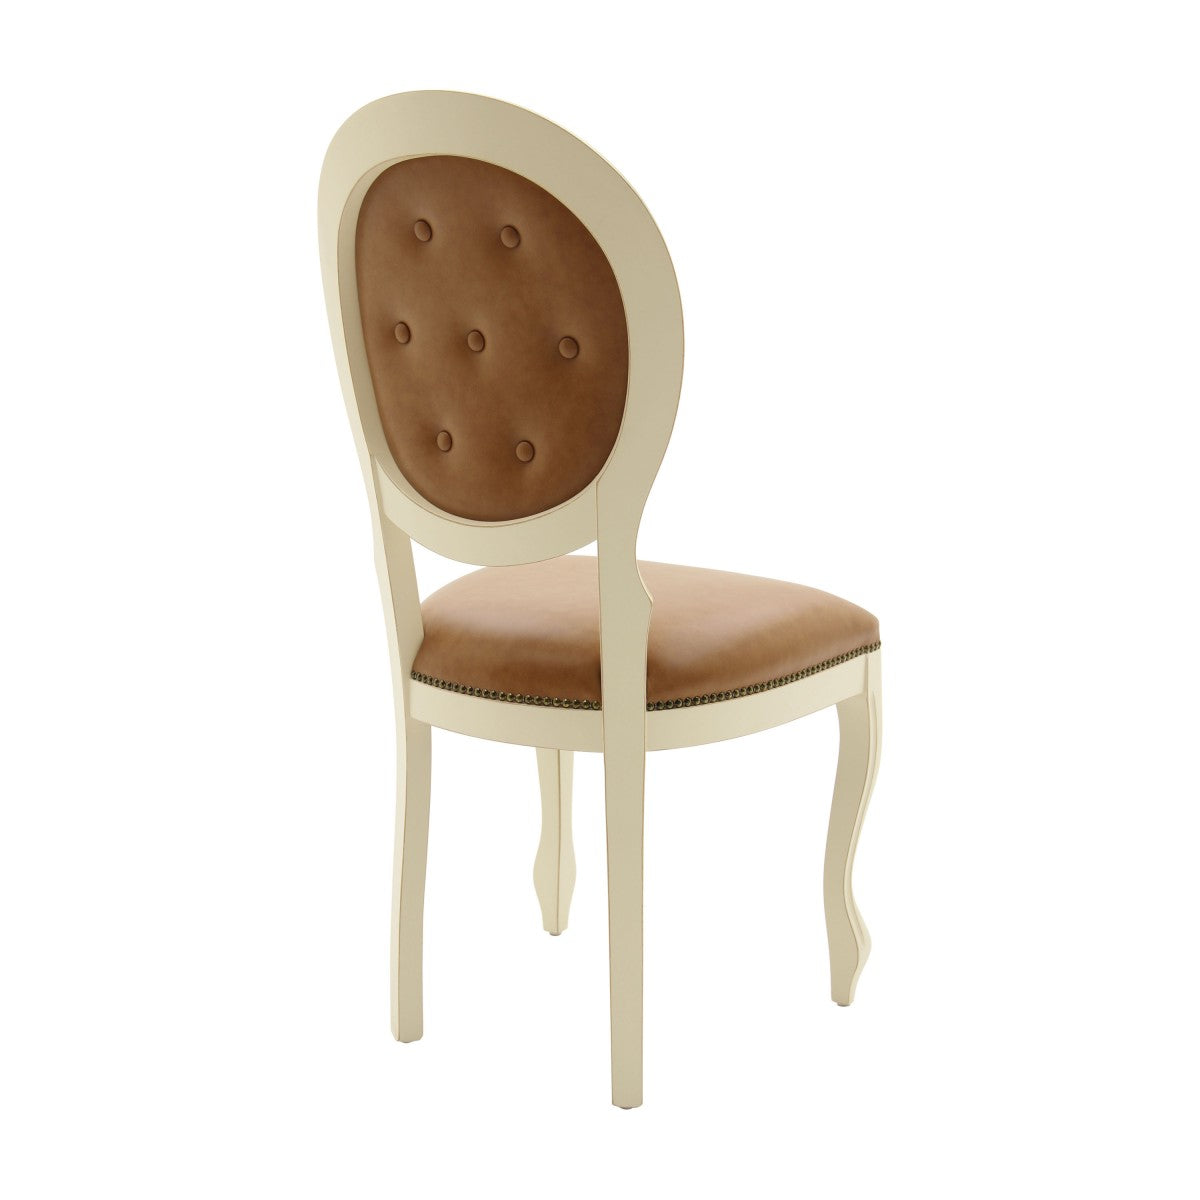 Art Nouveau Bespoke Upholstered Classic Dining Chair MS205S Custom Made To Order